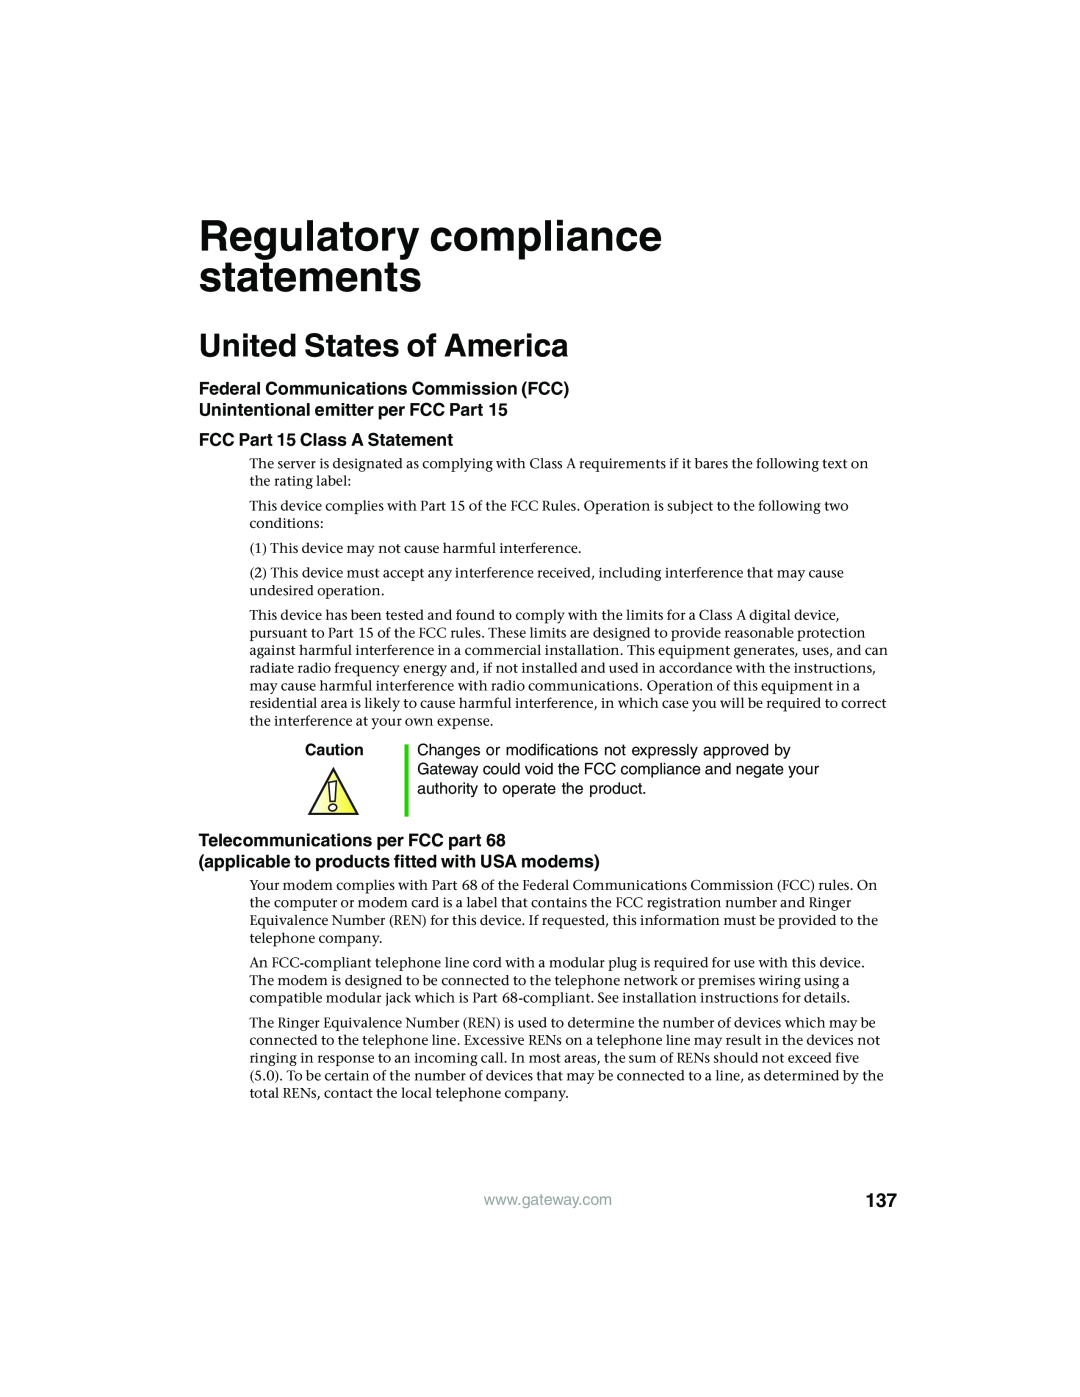 Gateway 960 manual Regulatory compliance statements, United States of America, Federal Communications Commission FCC 